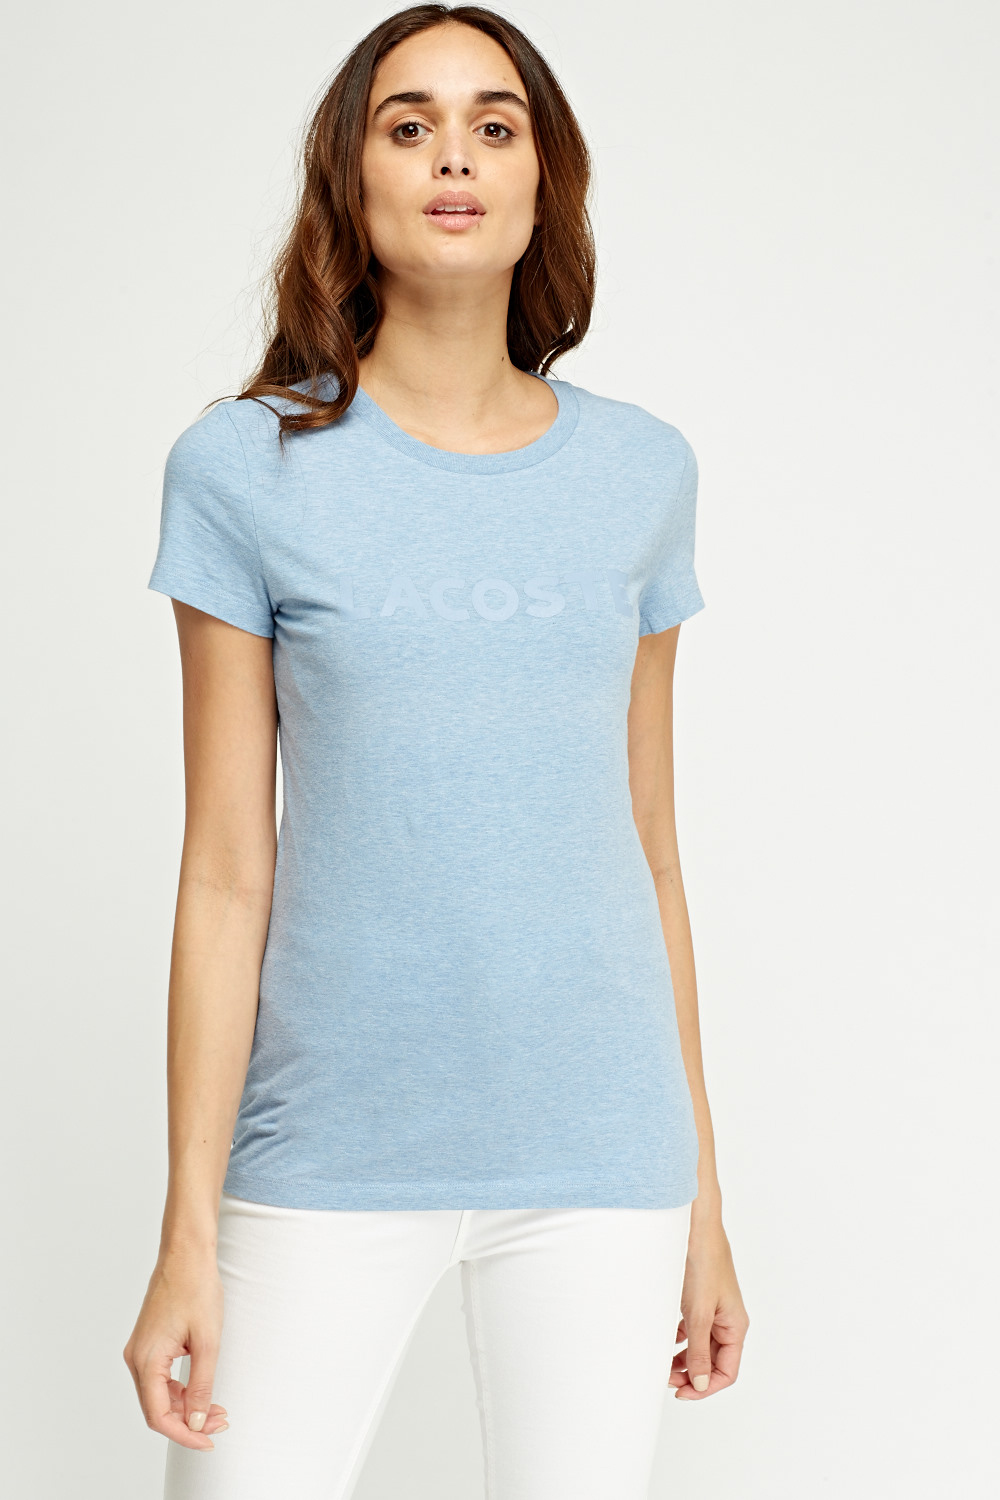 Lacoste Slogan T-Shirt - Limited edition | Discount Designer Stock